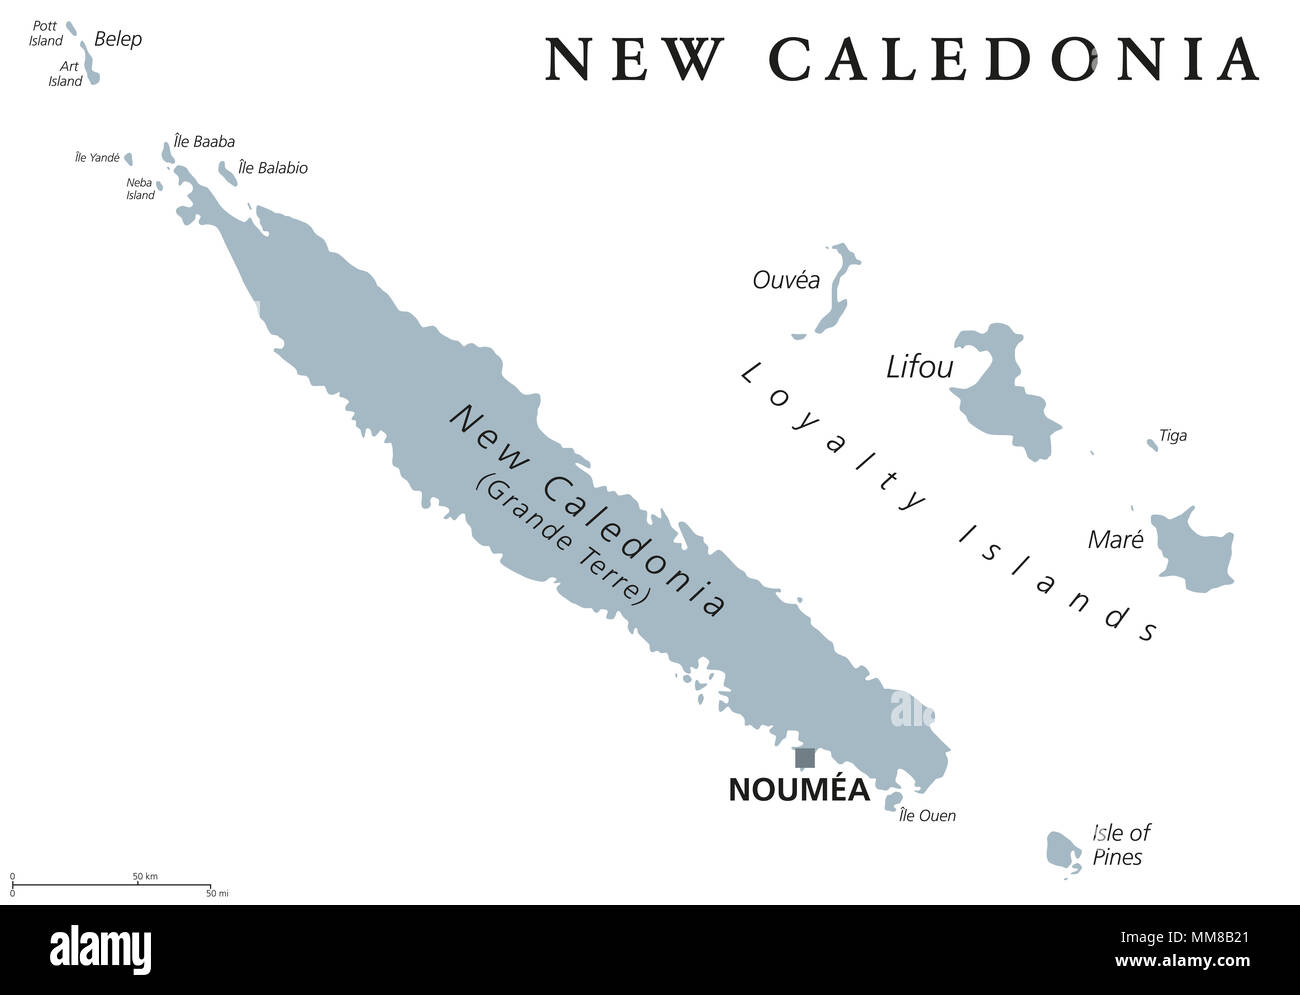 New Caledonia political map, capital Noumea. Collectivity of France in Pacific Ocean. Archipelago. Main Island Grand Terre and Loyalty Islands. Stock Photo